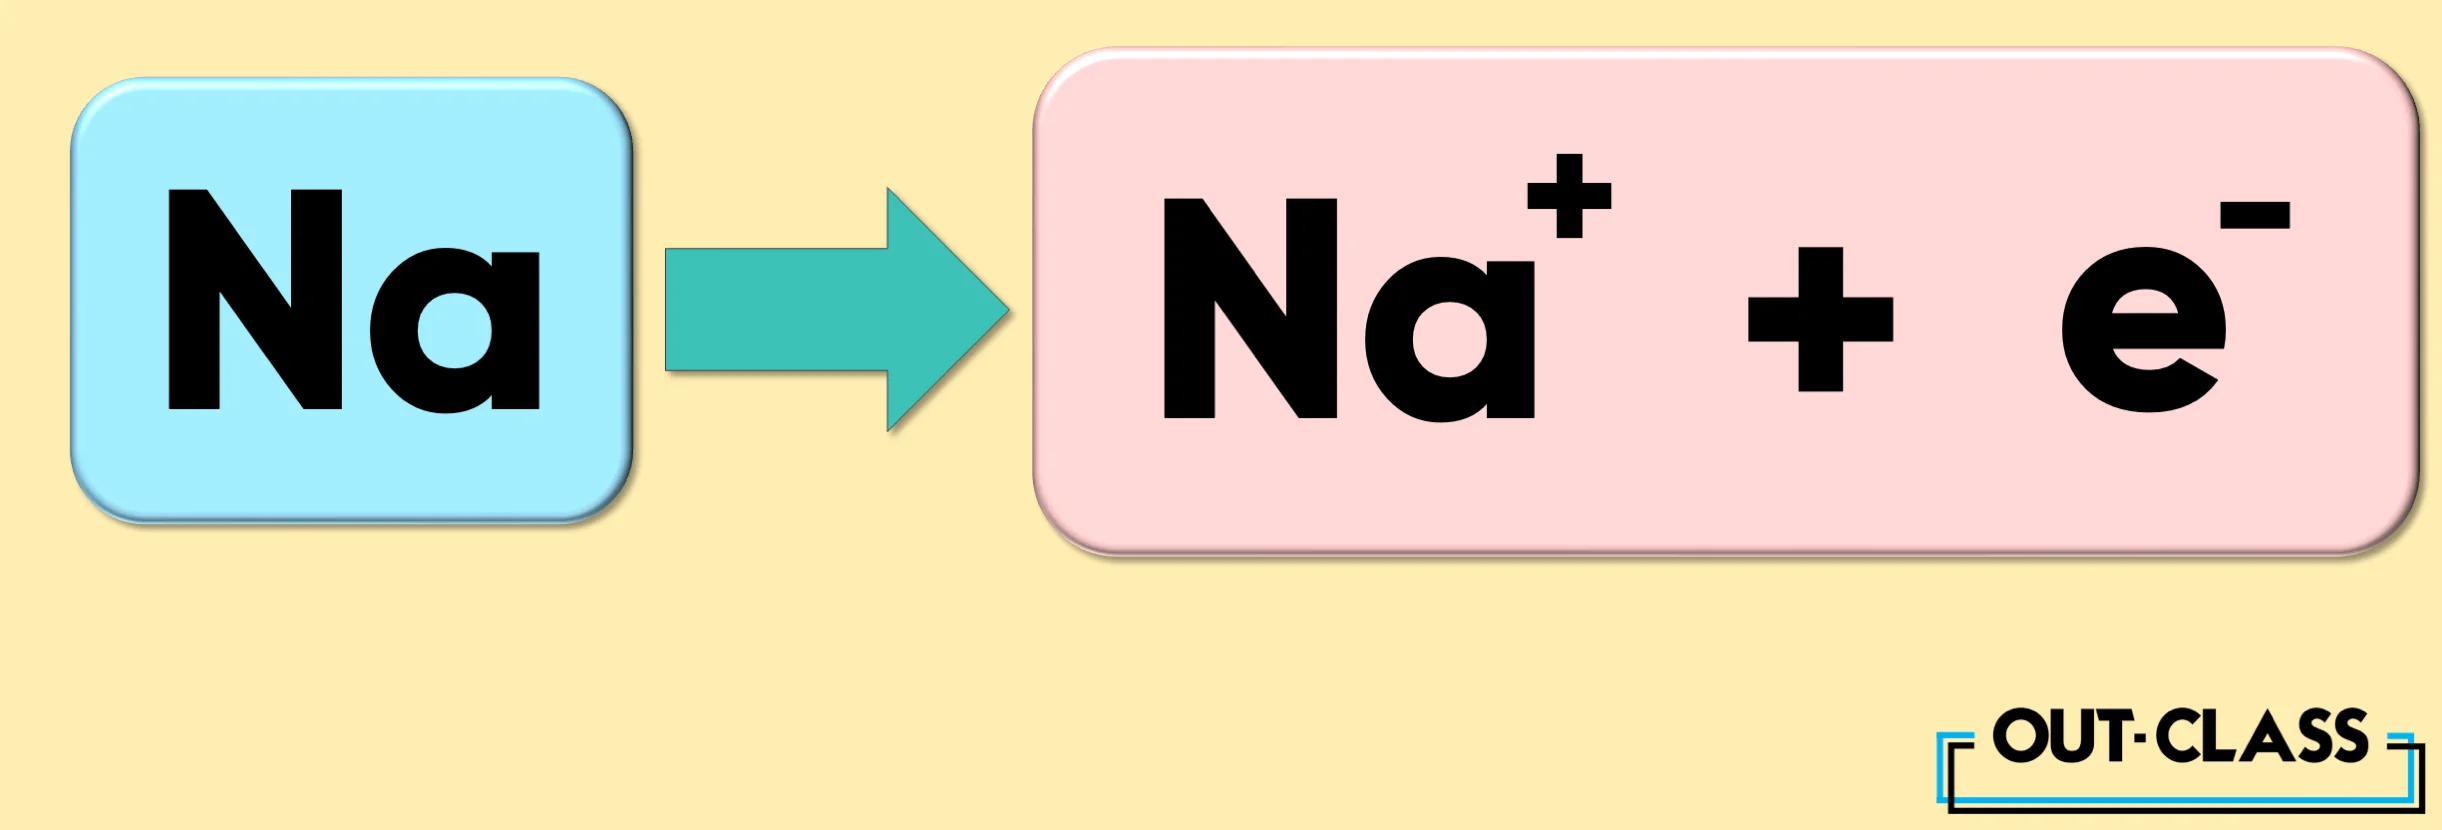 It shows the element sodium (Na) with a ion and charge of 1+ as an example of cations and anions. 